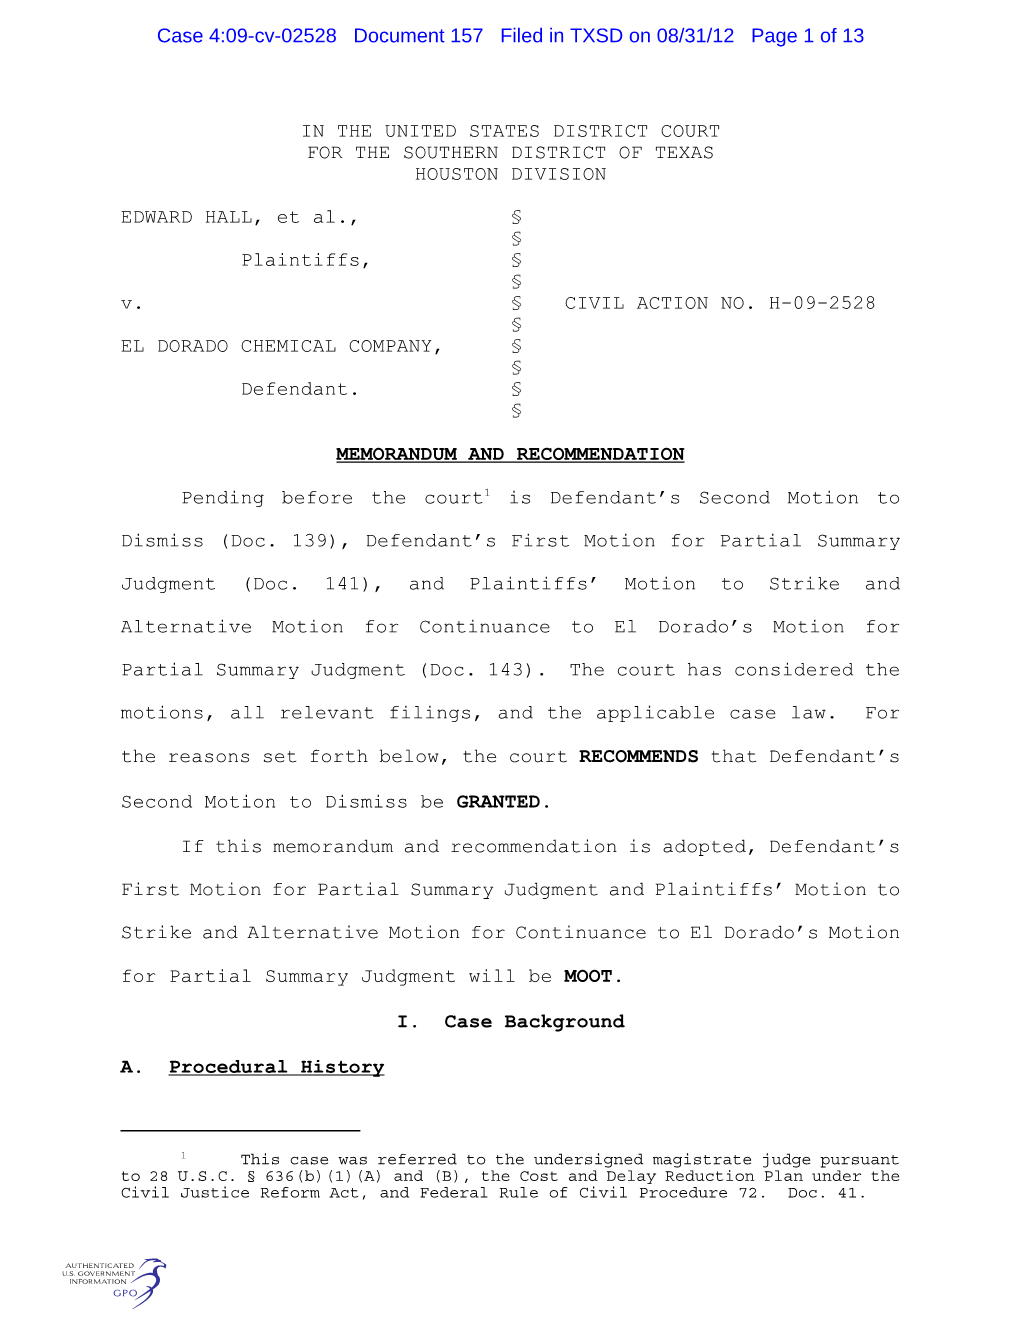 Case 4:09-Cv-02528 Document 157 Filed in TXSD on 08/31/12 Page 1 of 13